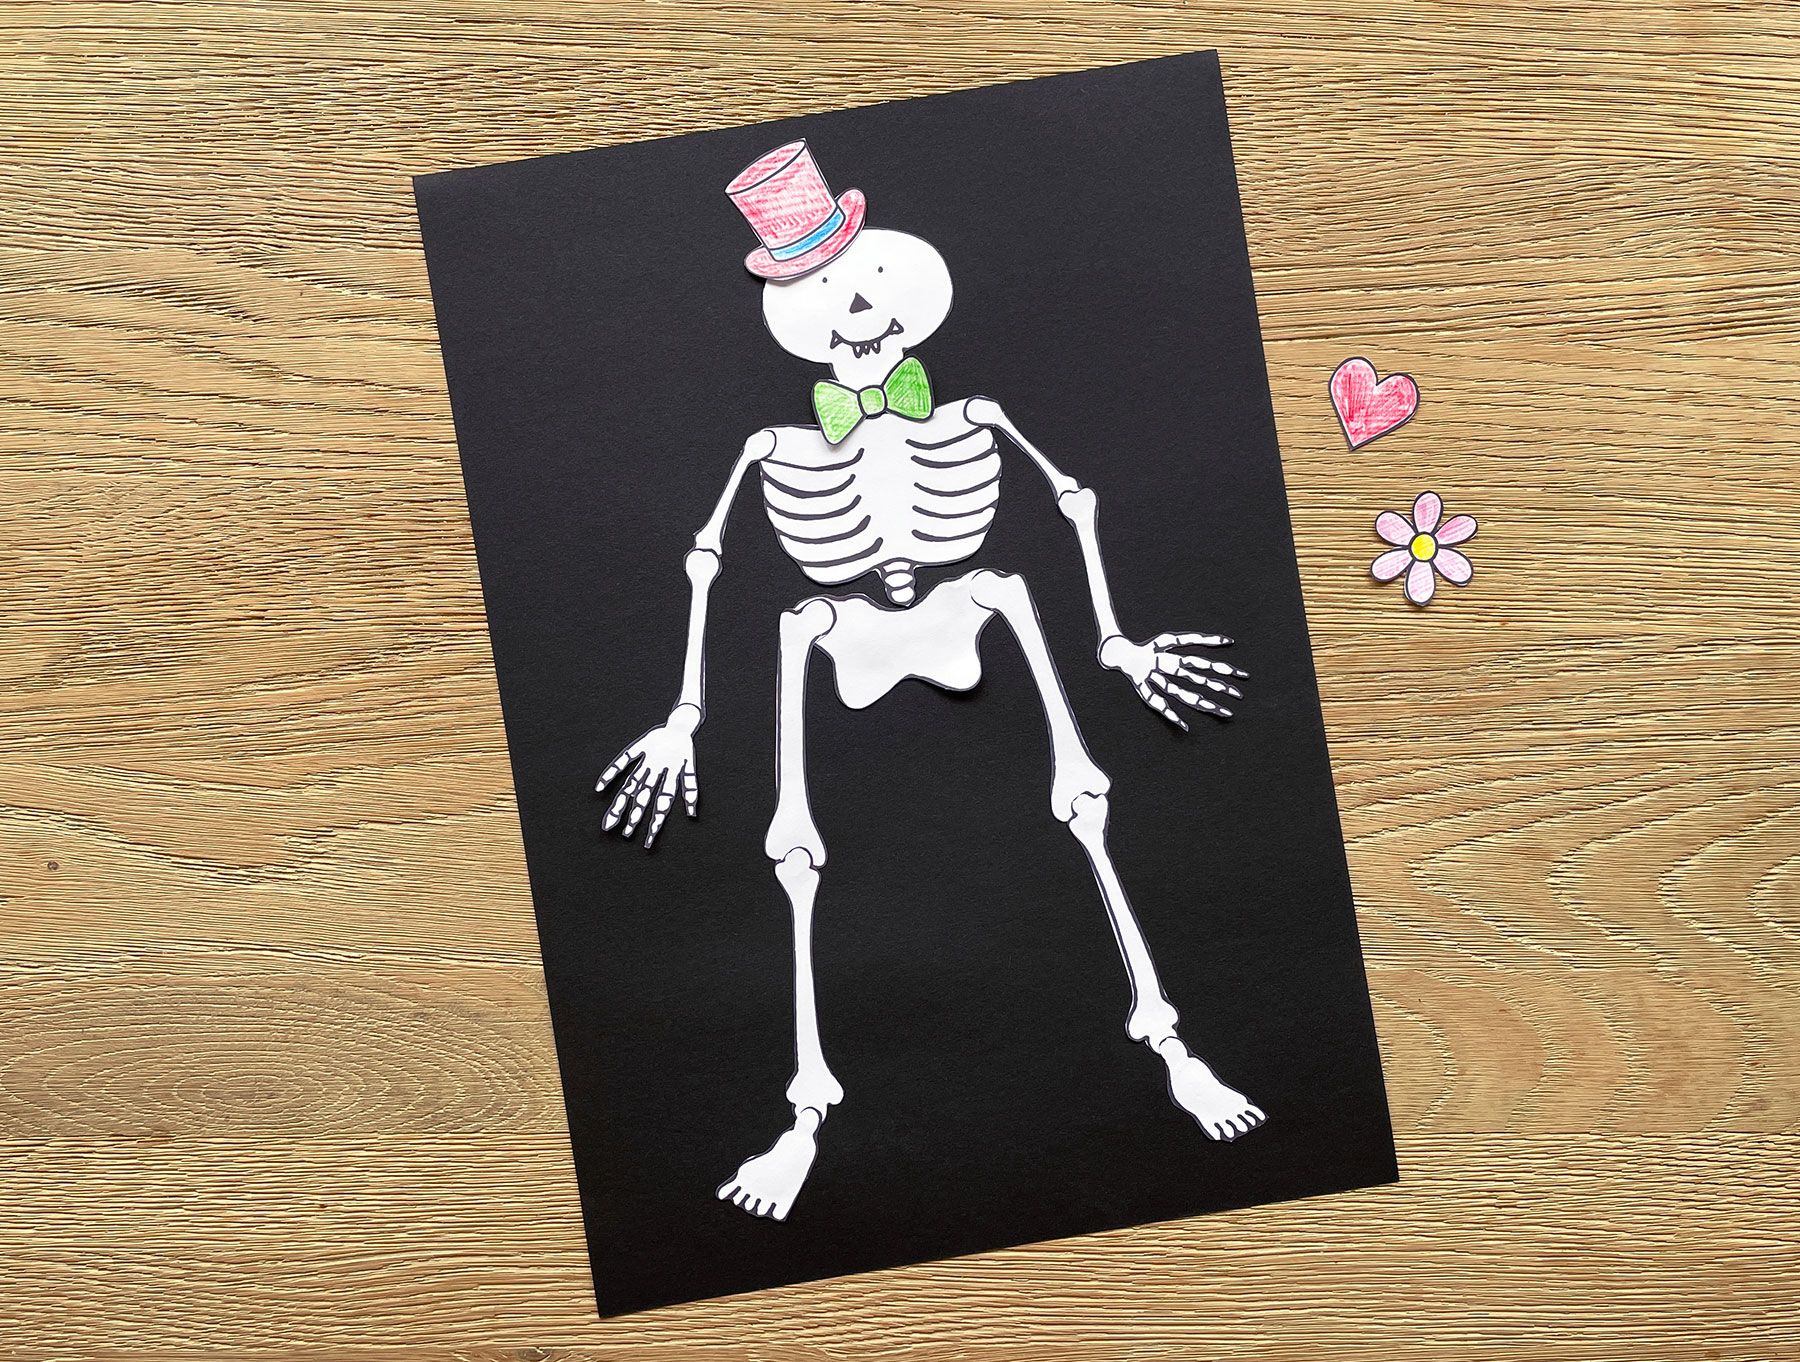 A photo of the completed Mr Funnybones stencil stuck onto a piece of black paper with the prop stencils next to it